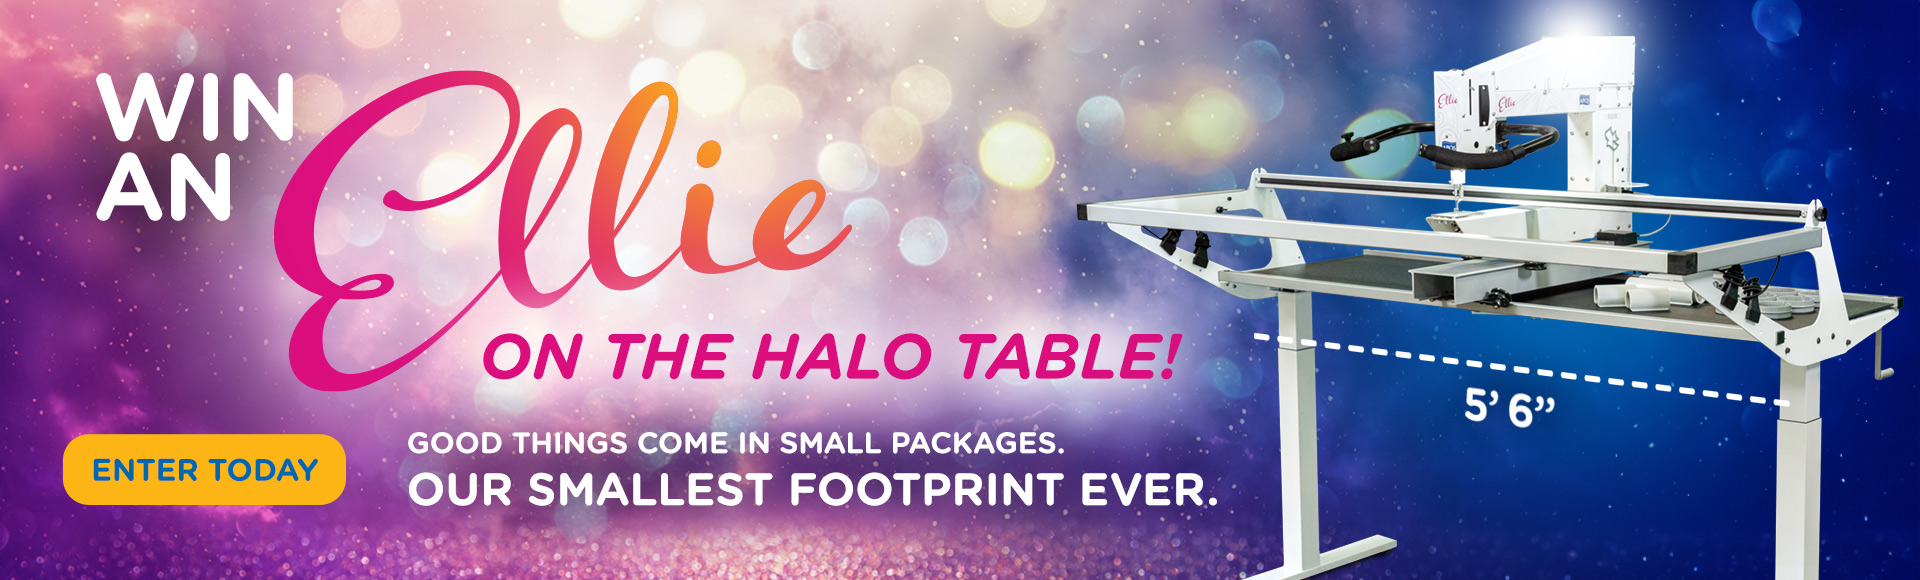 Ellie quilting machine on a Halo table